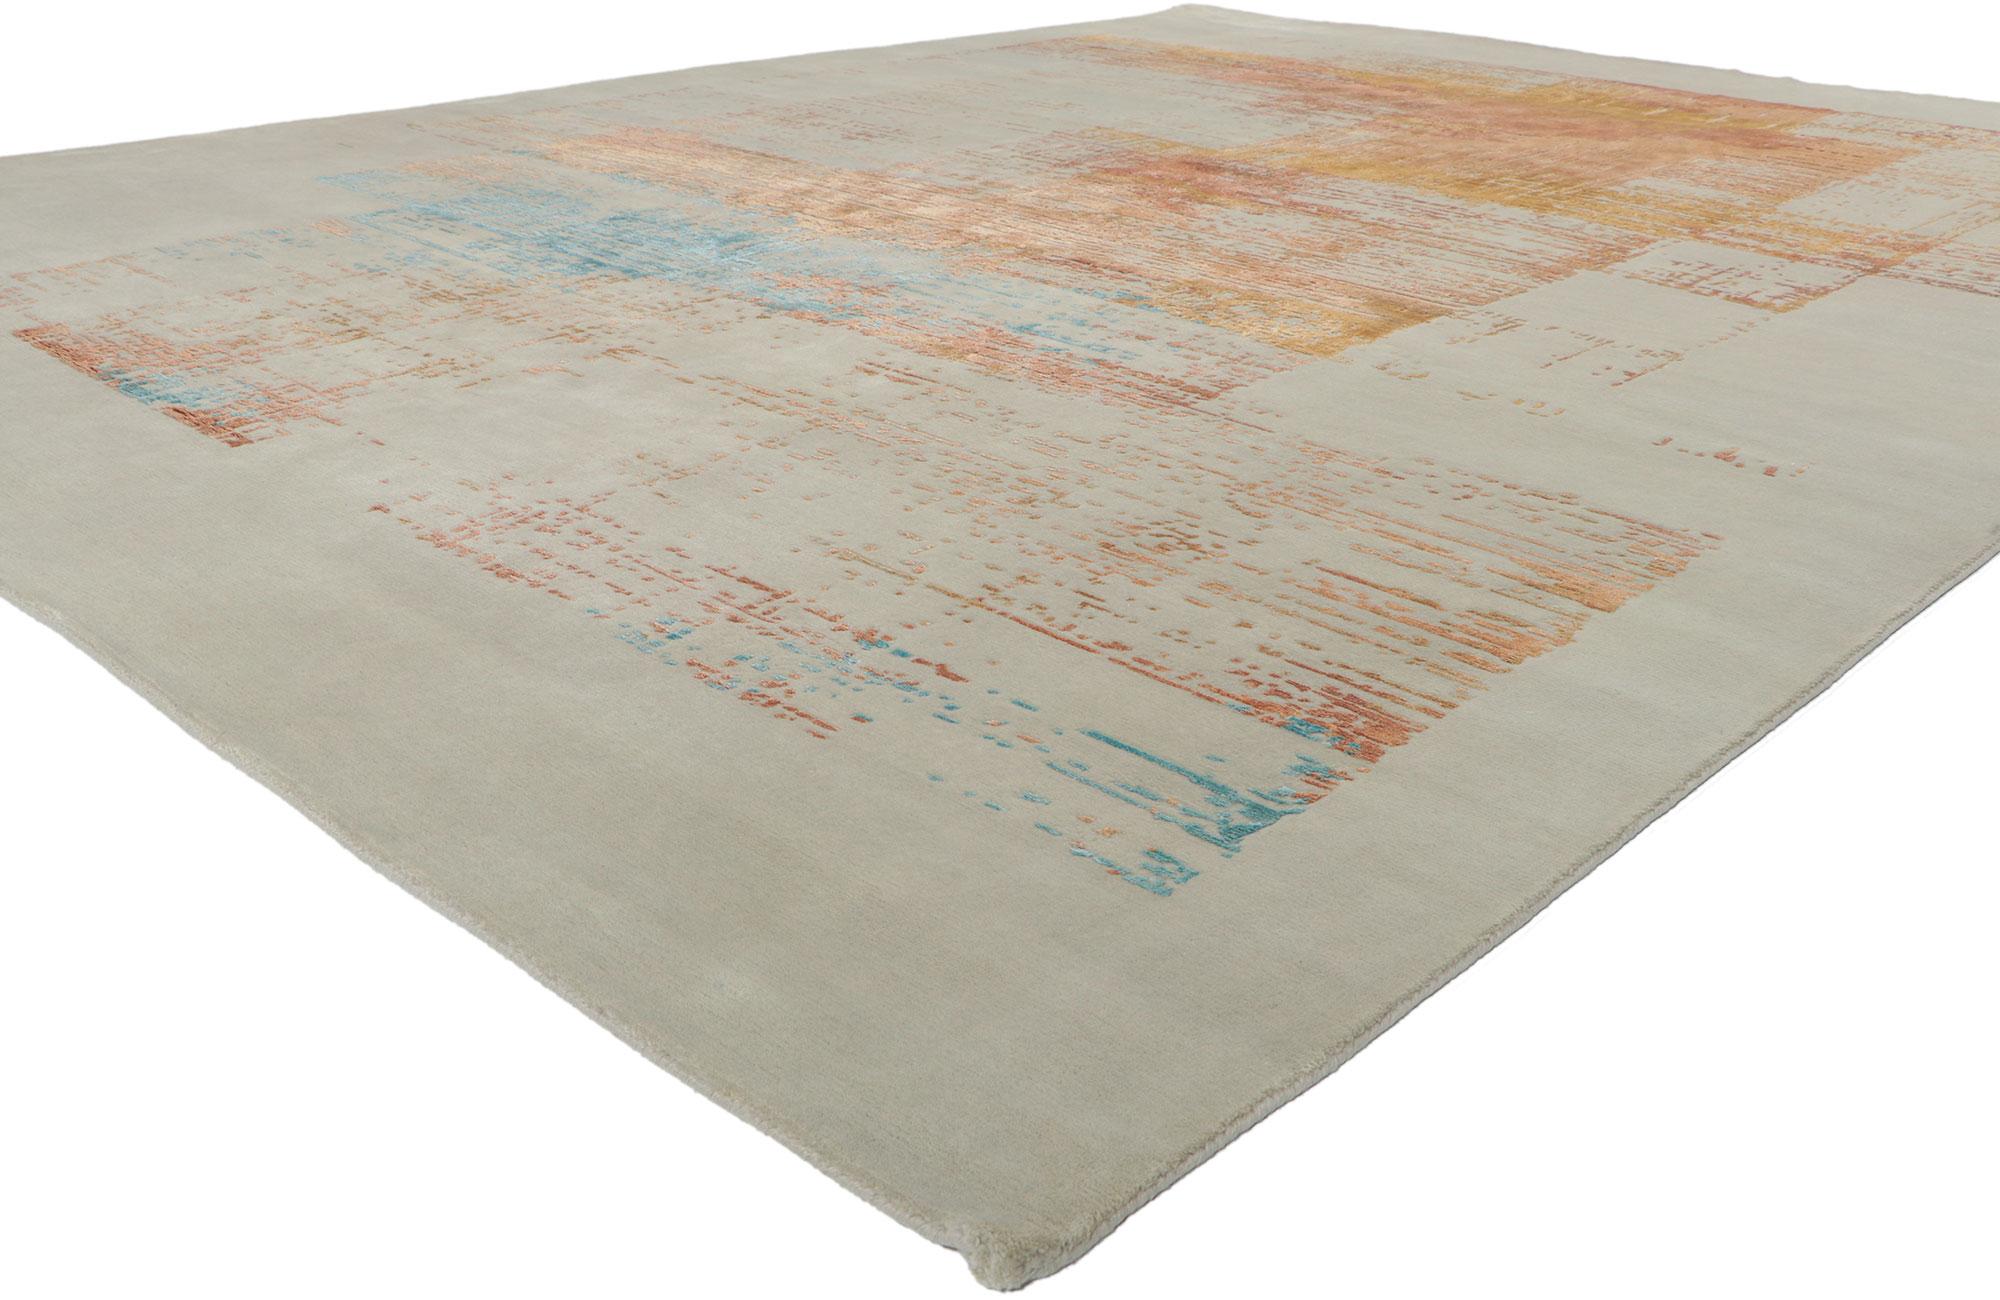 30891 New Contemporary Abstract rug Inspired by Helen Frankenthaler, 09'00 x 11'11. ?Showcasing a modern style and raised silk design with incredible detail and texture, this hand knotted contemporary textured rug is a captivating vision of woven